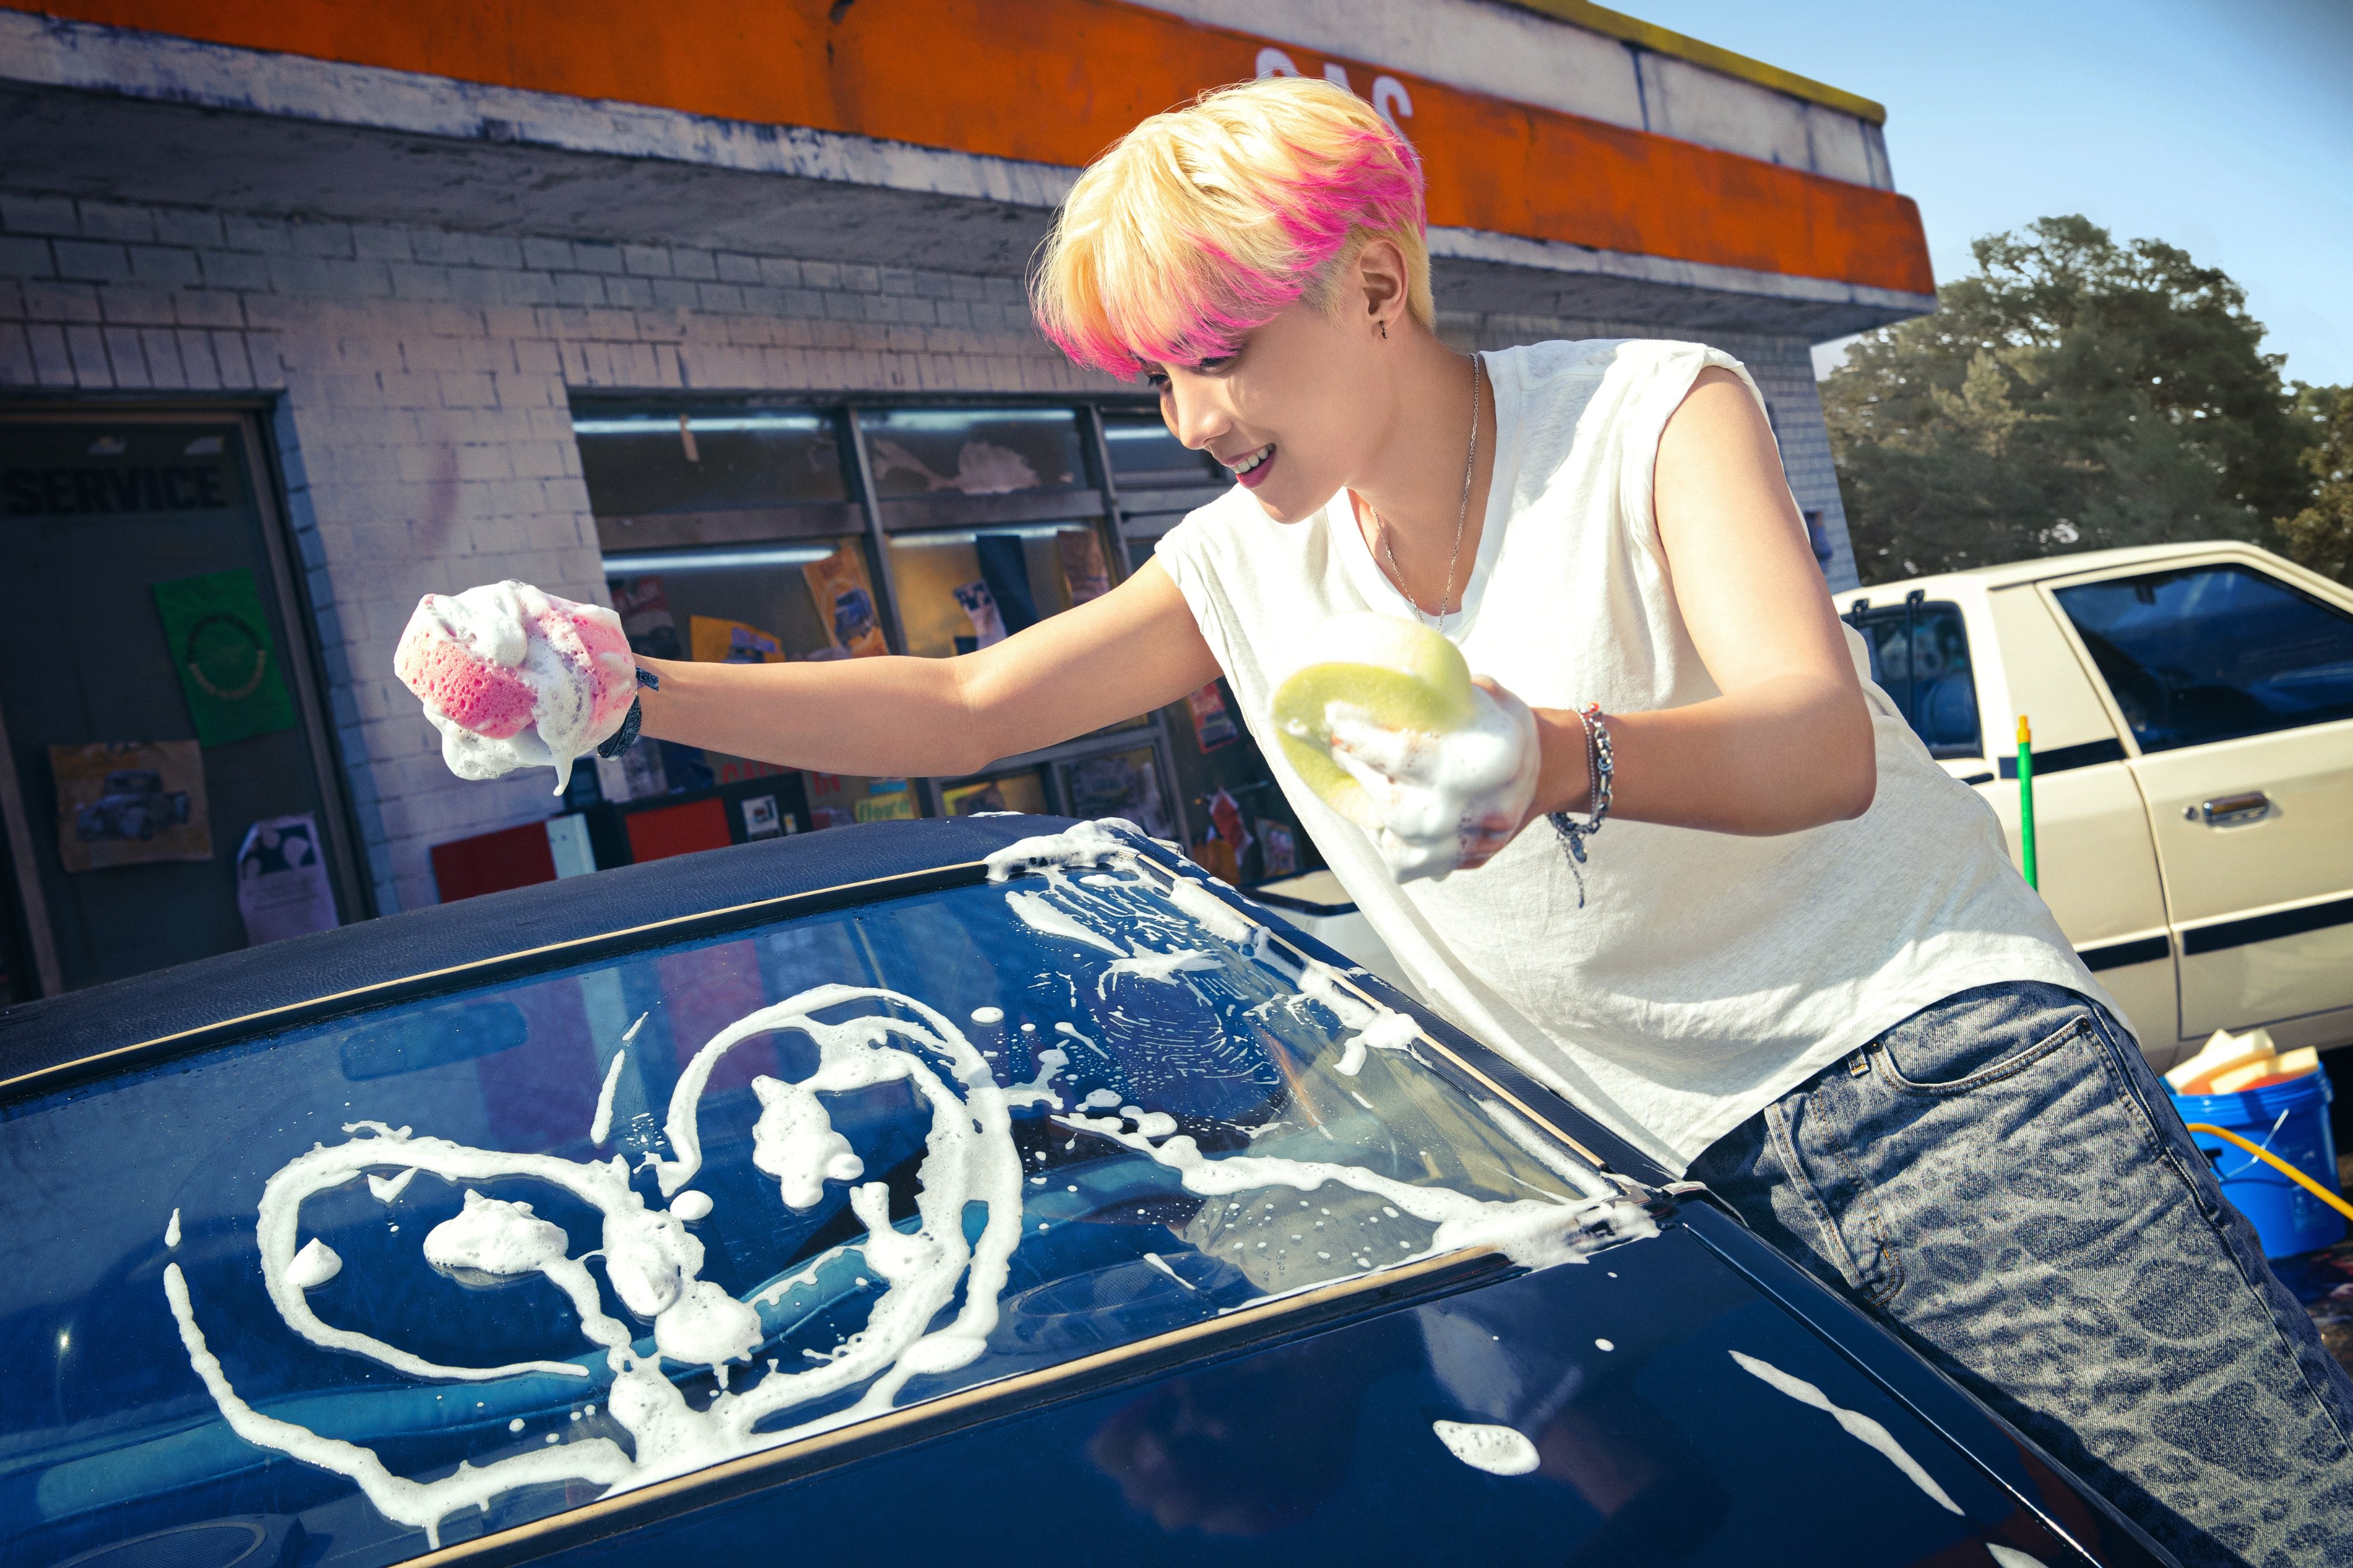 BTS J-Hope's Blue Hair in "Butter" Music Video - wide 5